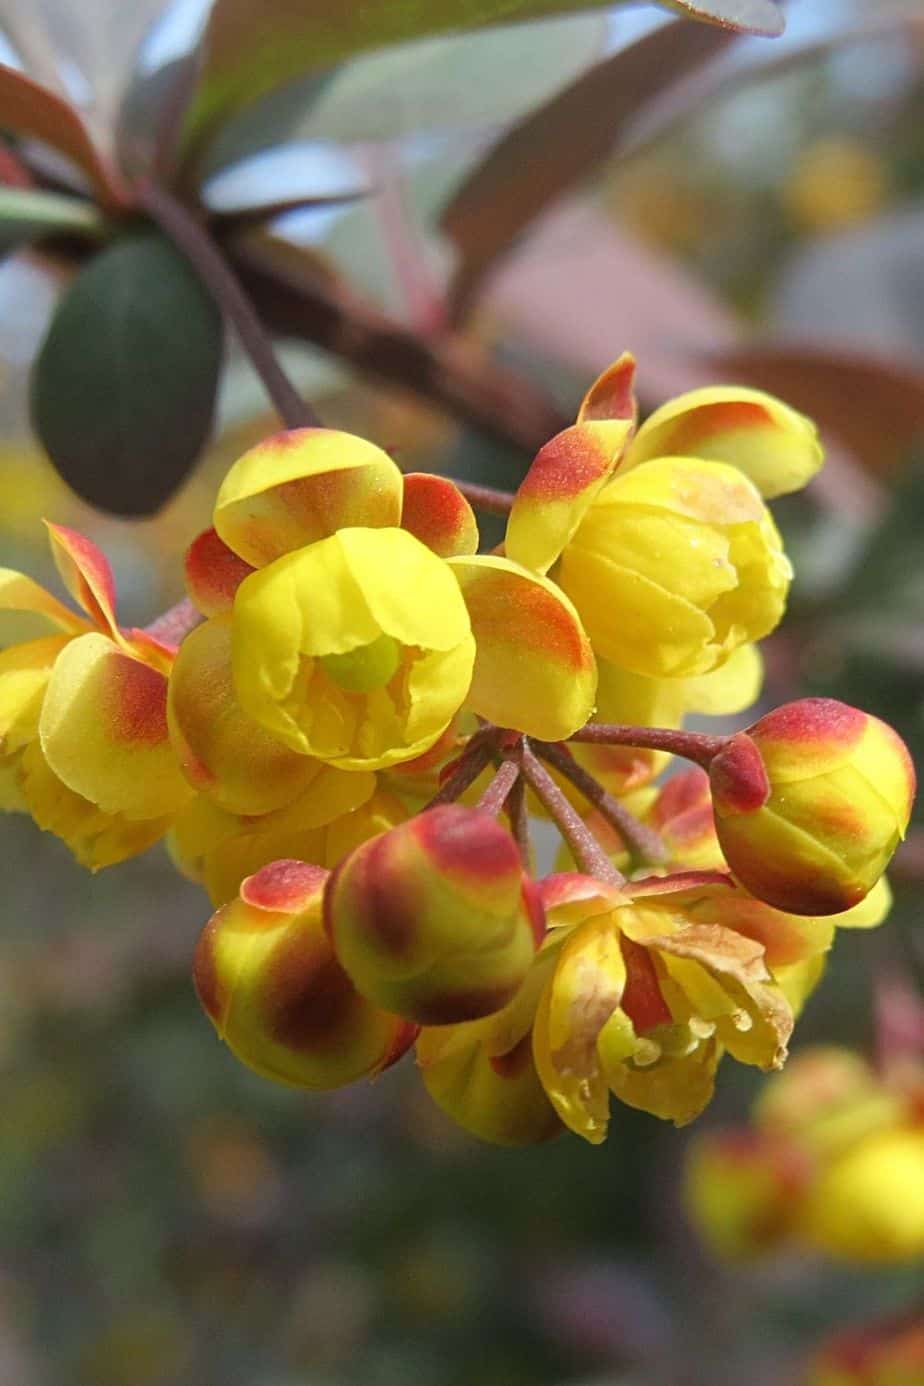 Berberis, aka Barberry, is another stunning plant you can grow on an east-facing balcony